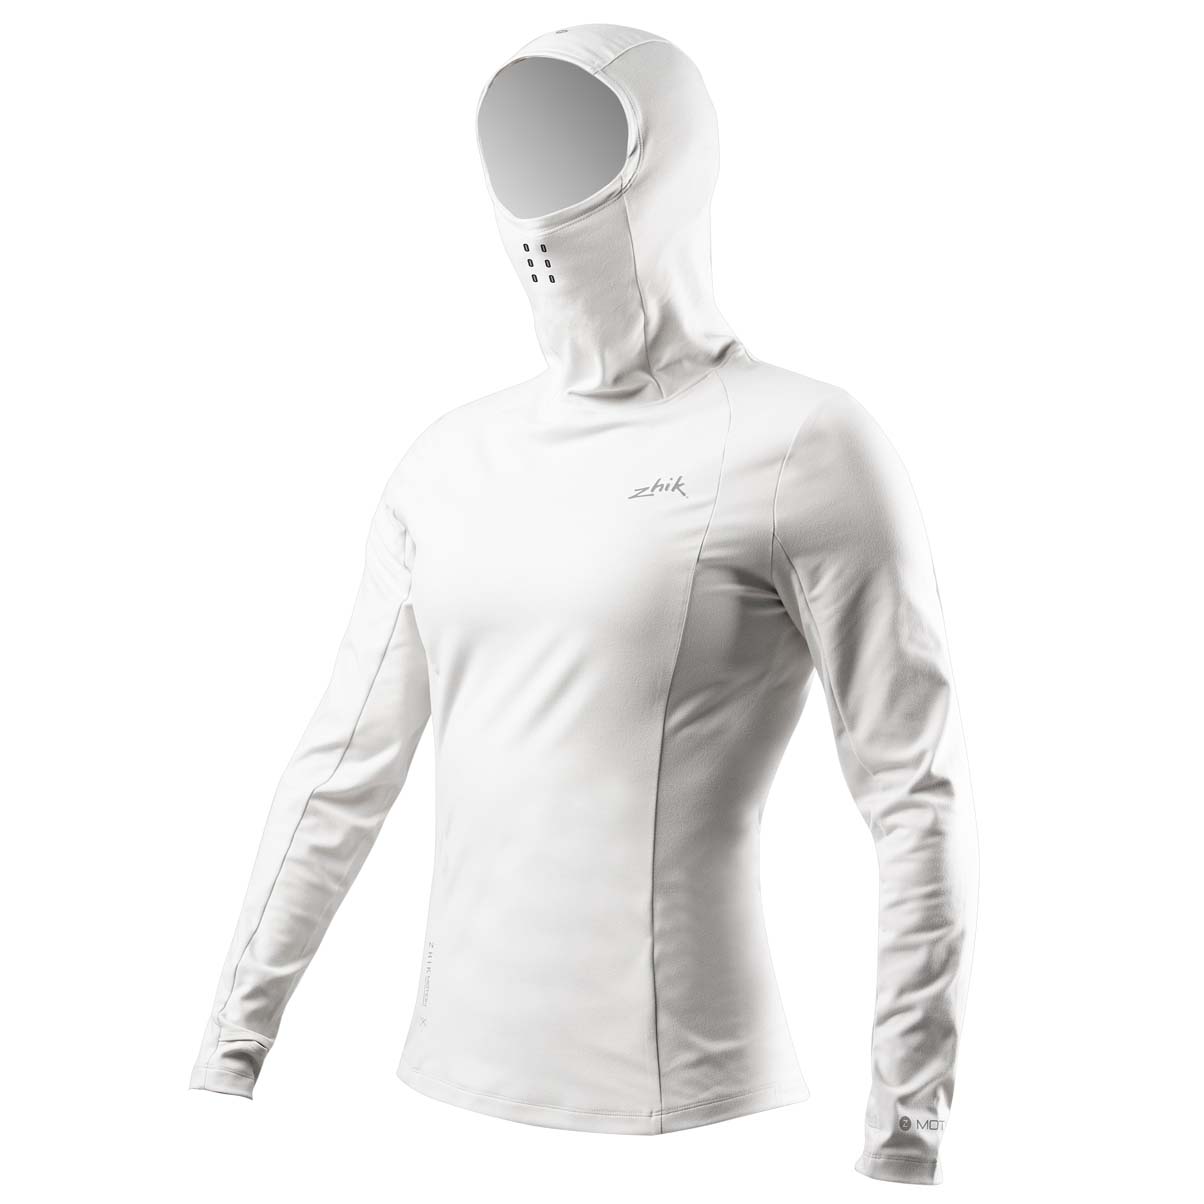 ZhikMotion Long Sleeve Hooded Top Womens